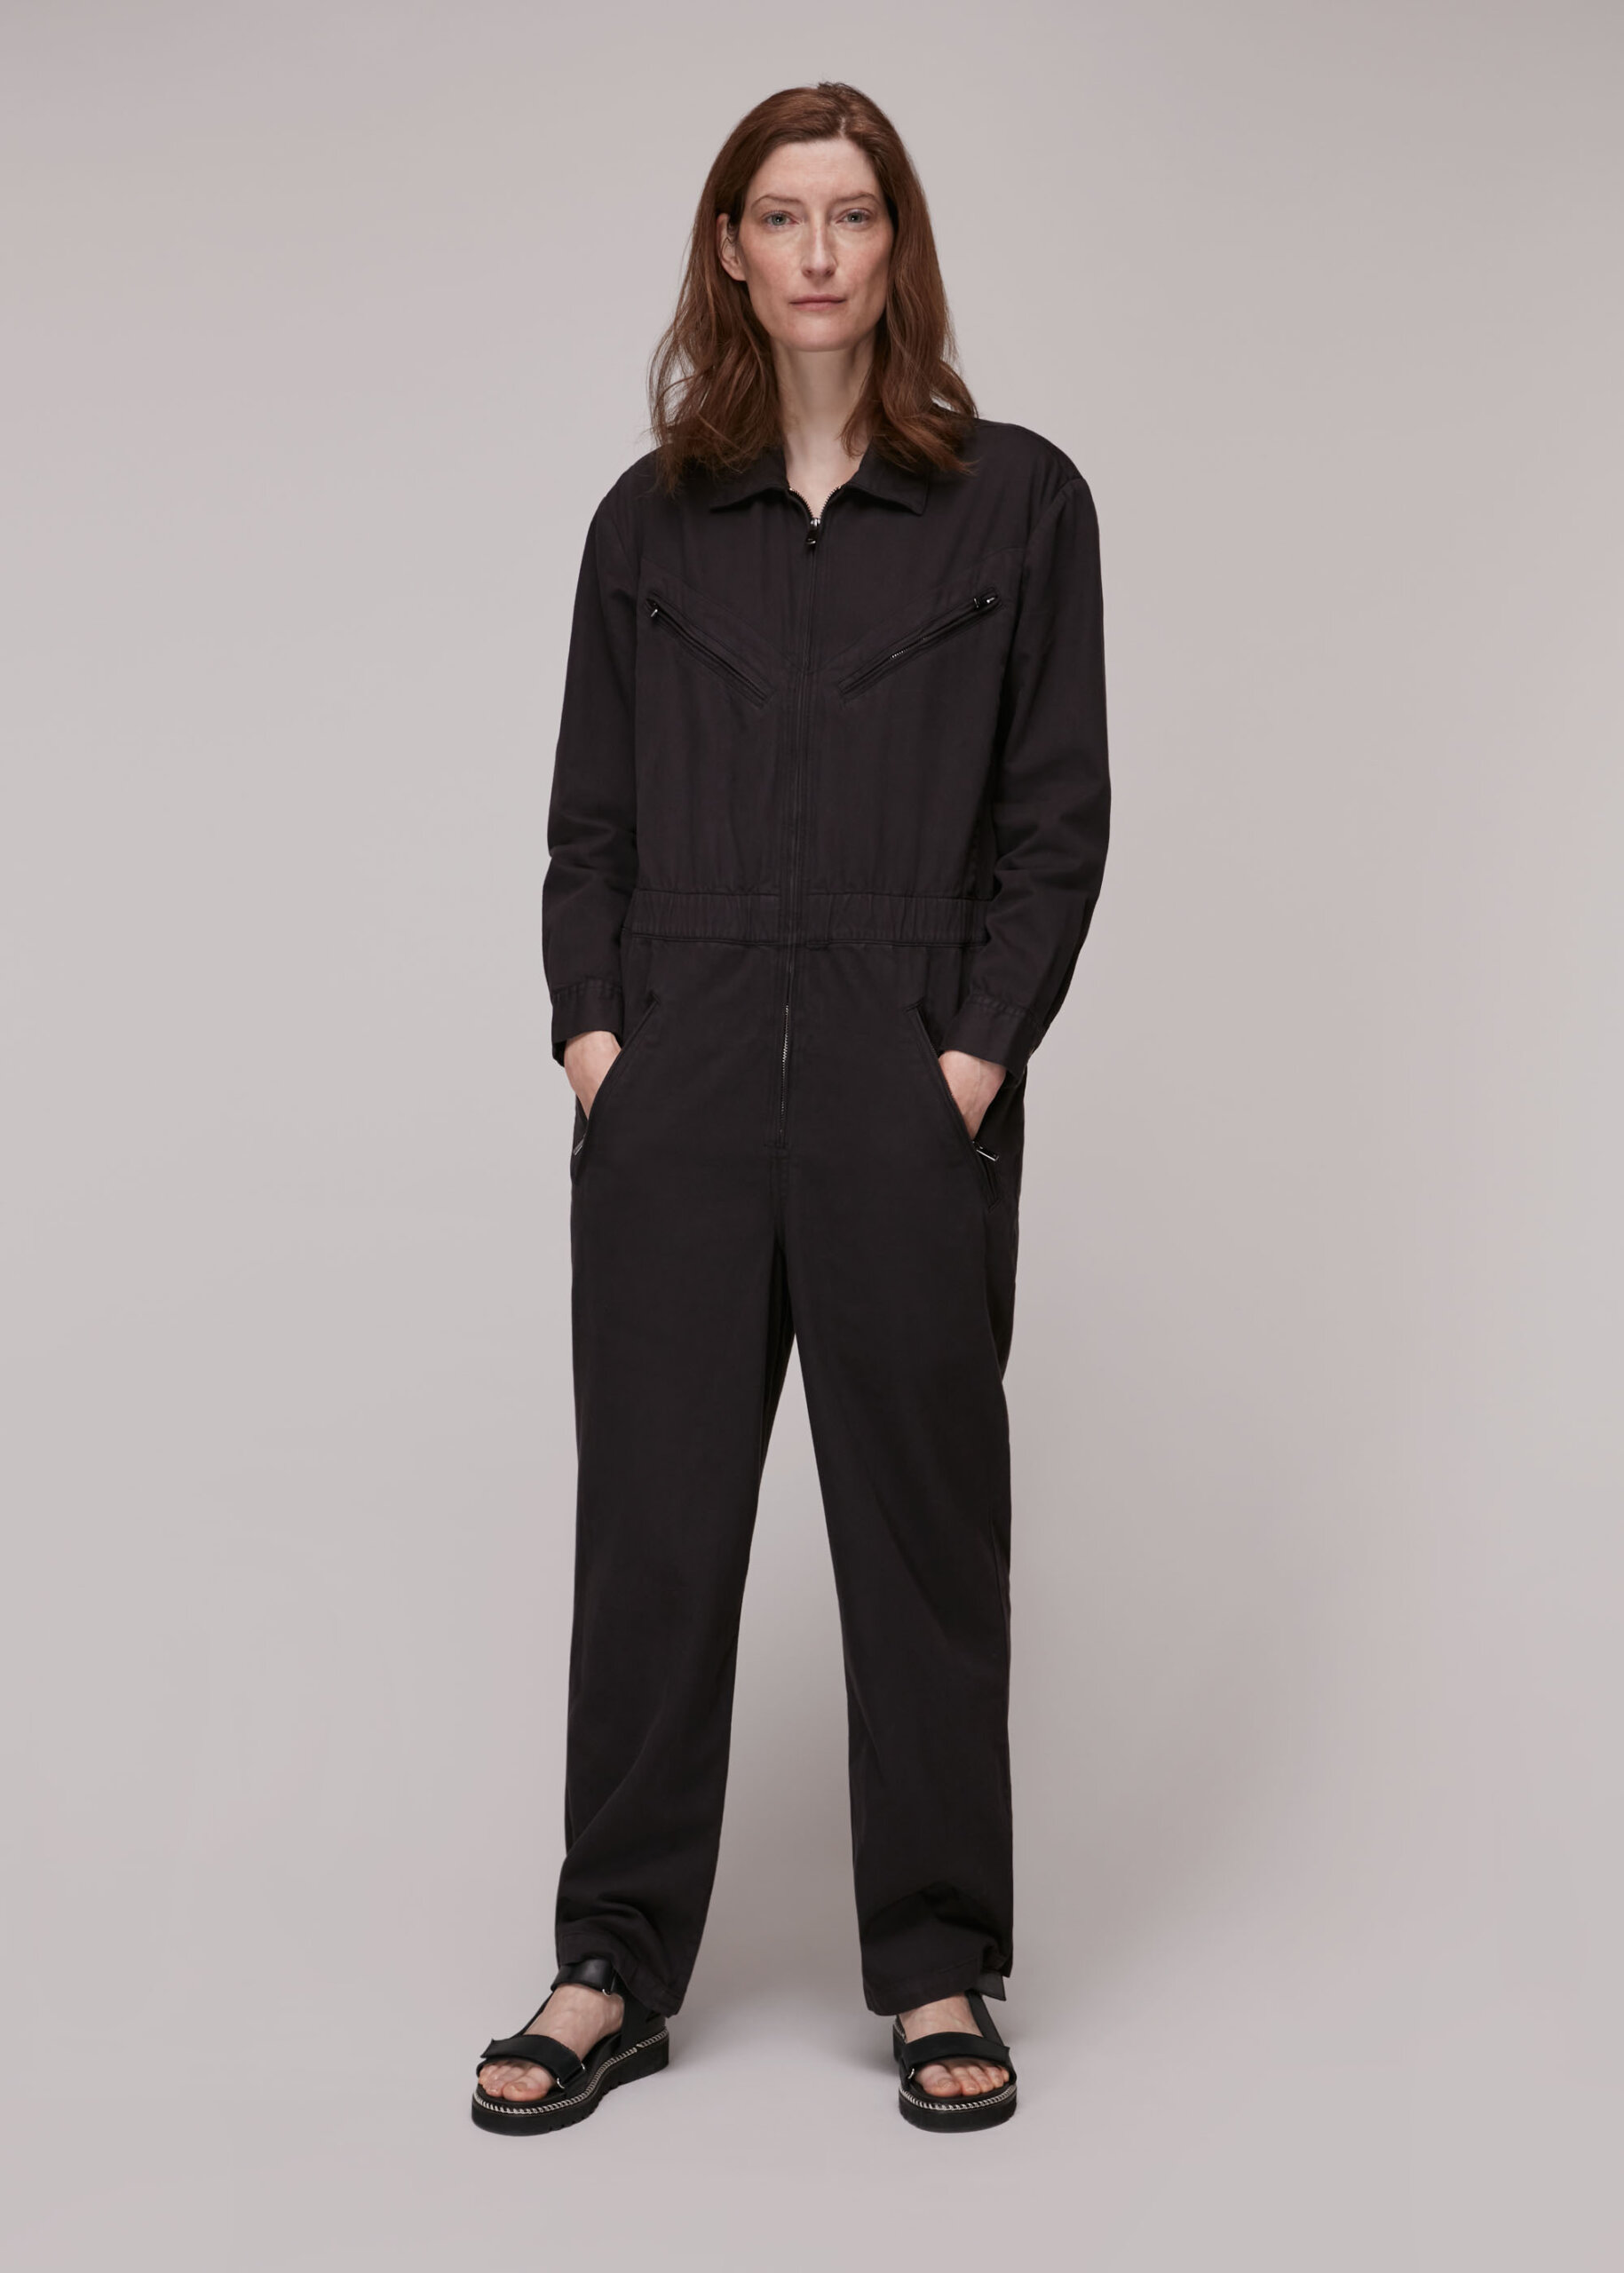 Whistles Women's Ultimate Utility Jumpsuit